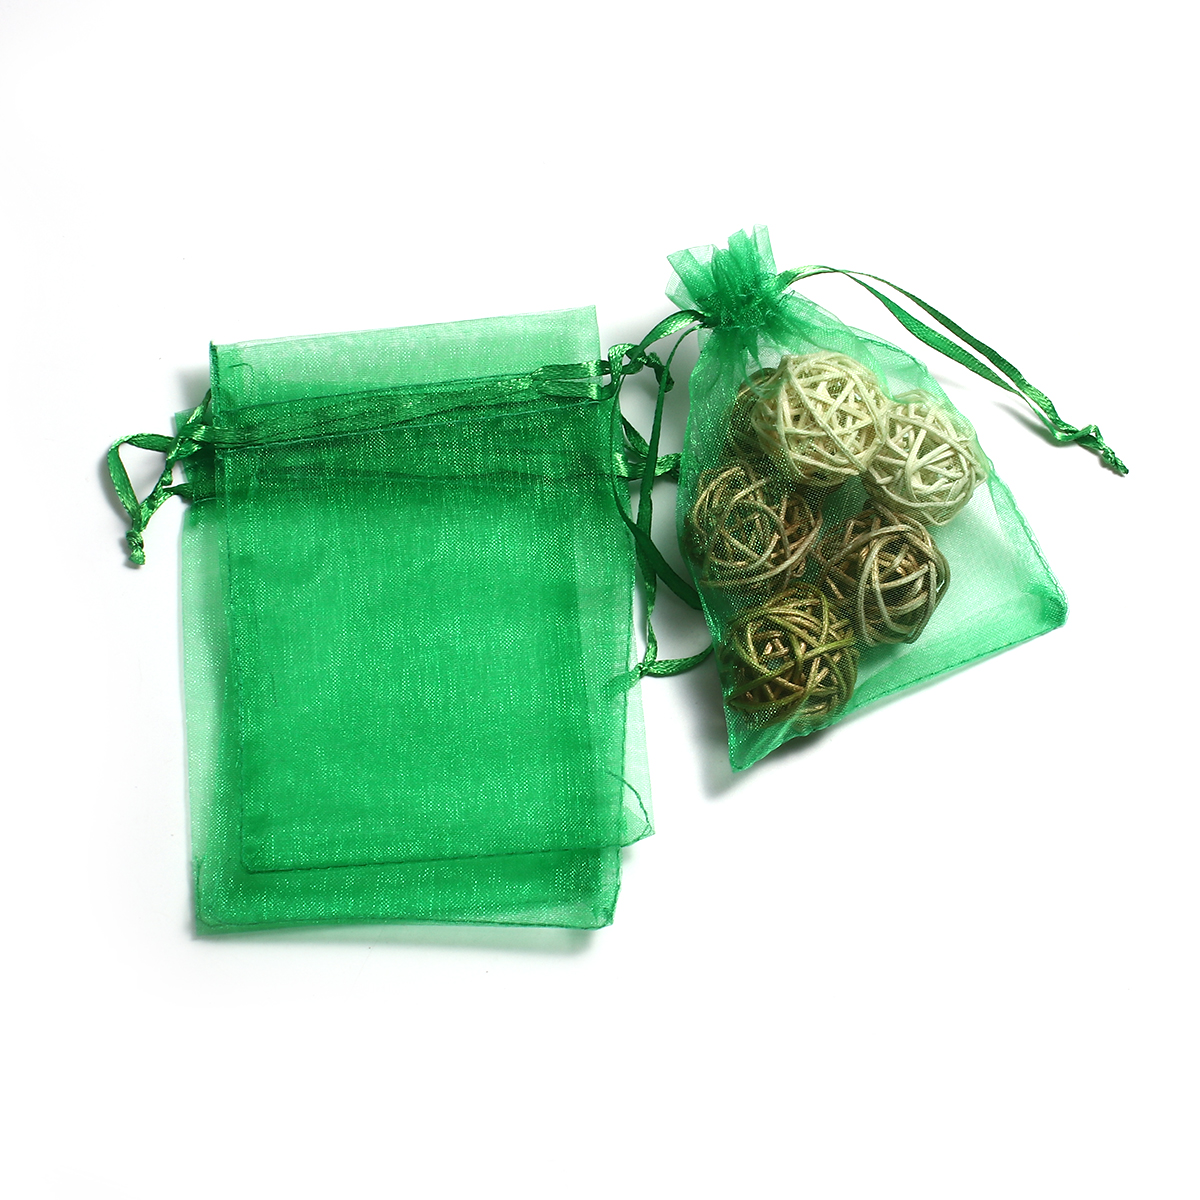 Picture of Wedding Gift Organza Jewelry Bags Drawstring Rectangle Dark Green (Usable Space: 9.5x9cm) 12cm(4 6/8") x 9cm(3 4/8"), 50 PCs